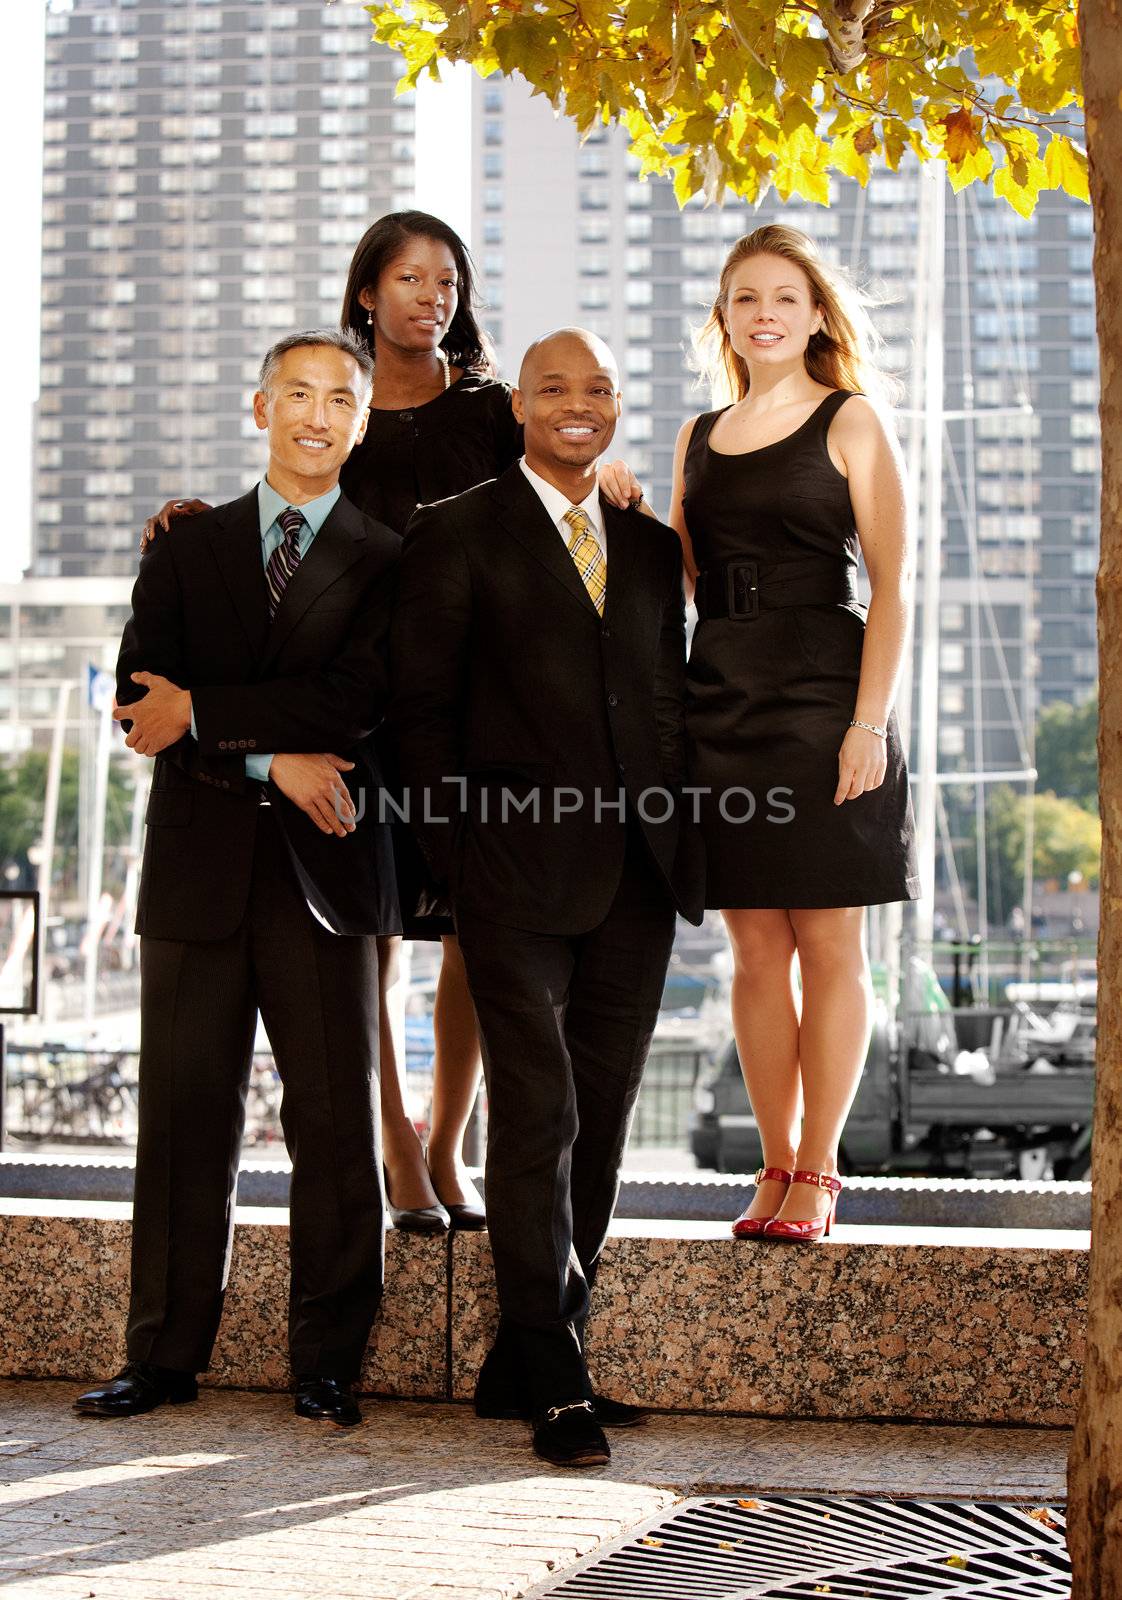 A business team portrait in an outdoor setting